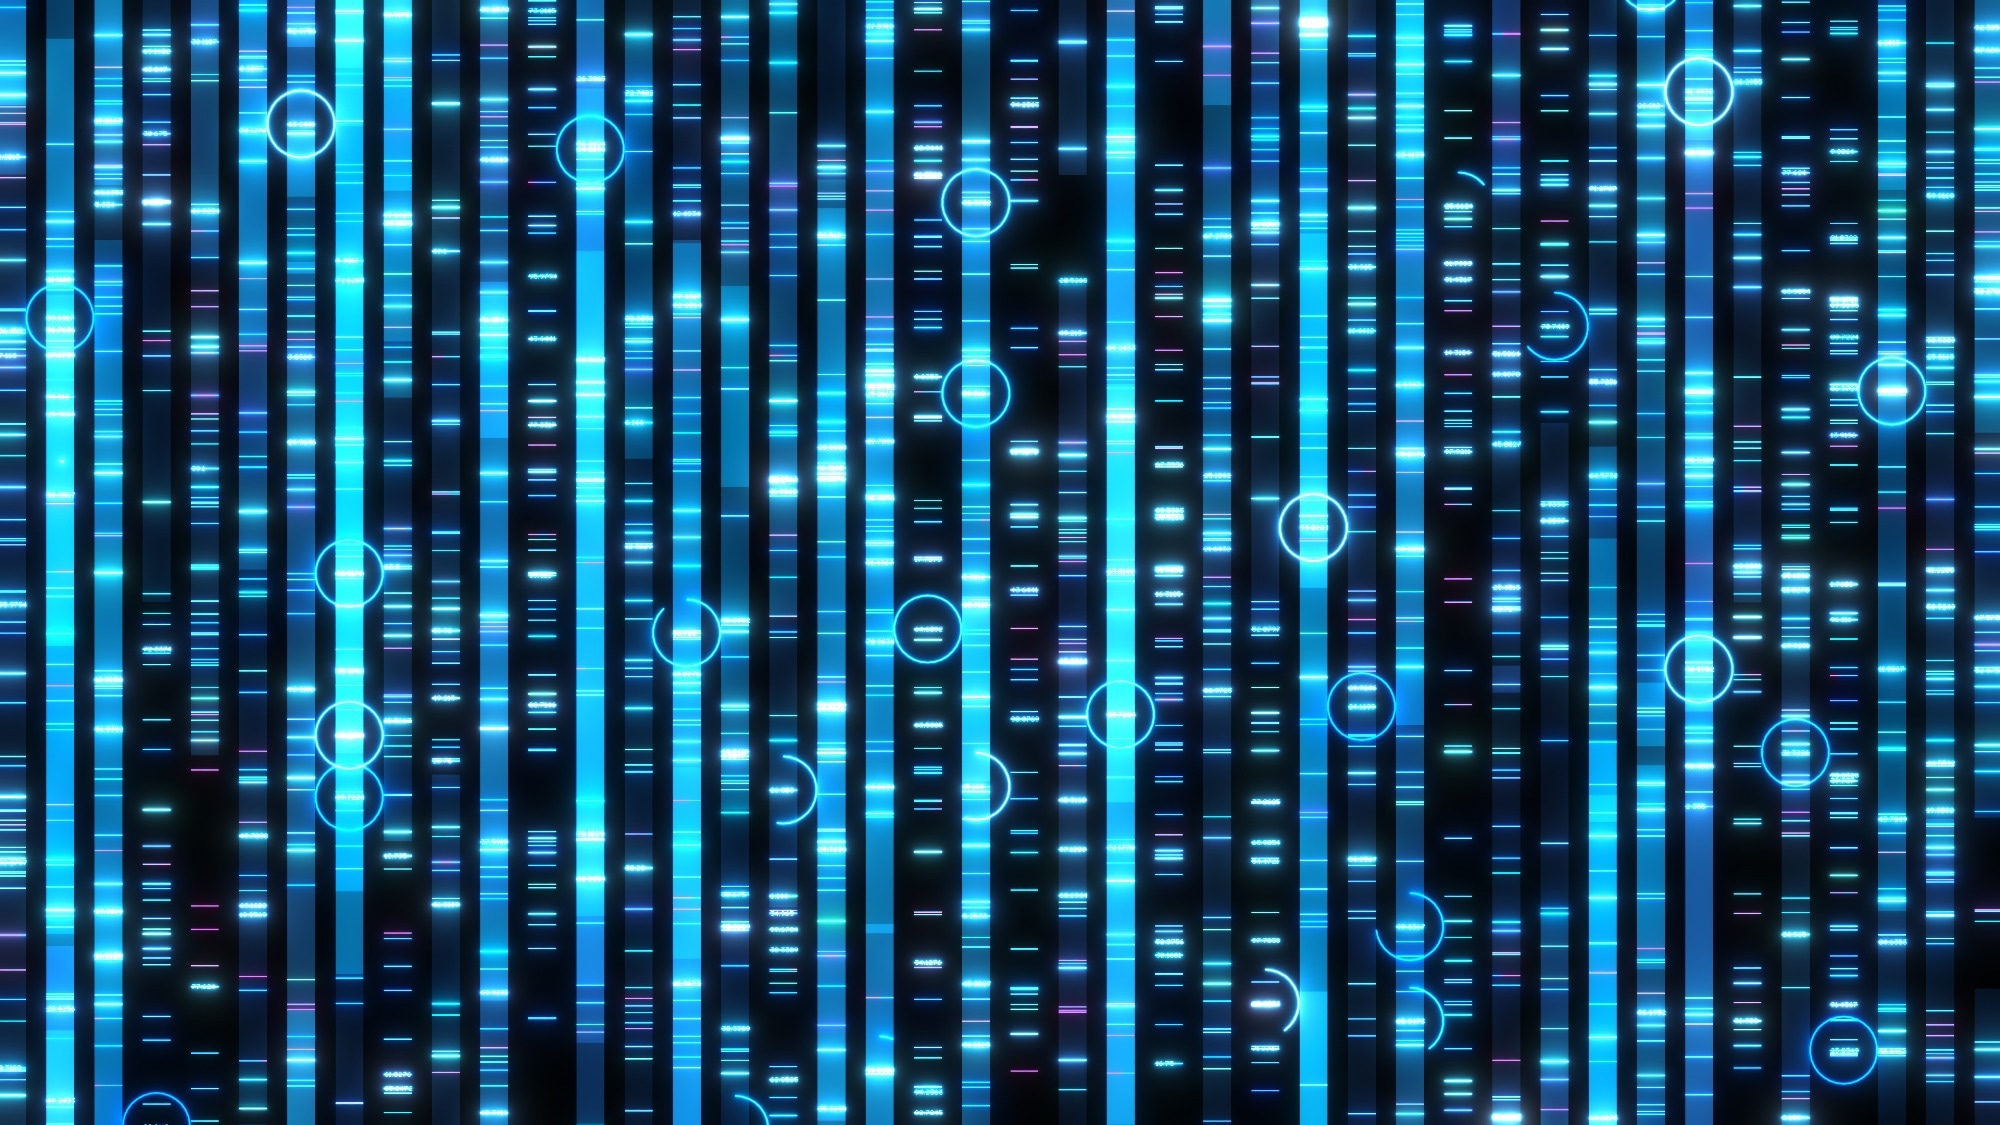 Study: Evaluation of the feasibility, diagnostic yield, and clinical utility of rapid genome sequencing in infantile epilepsy (Gene-STEPS): an international, multicentre, pilot cohort study. Image Credit: Immersion Imagery/Shutterstock.com